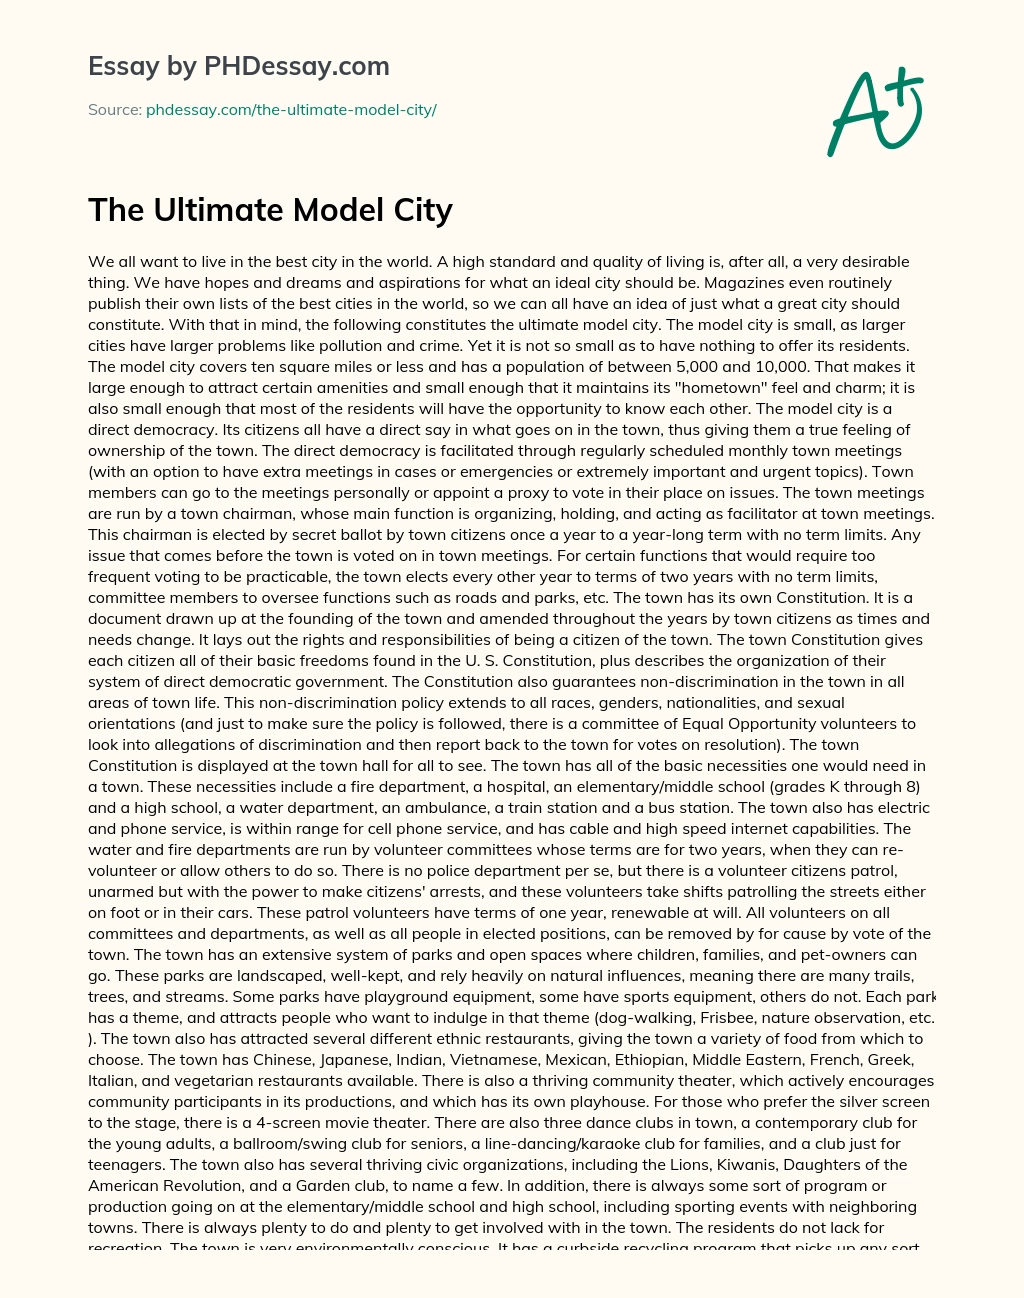 The Ultimate Model City essay